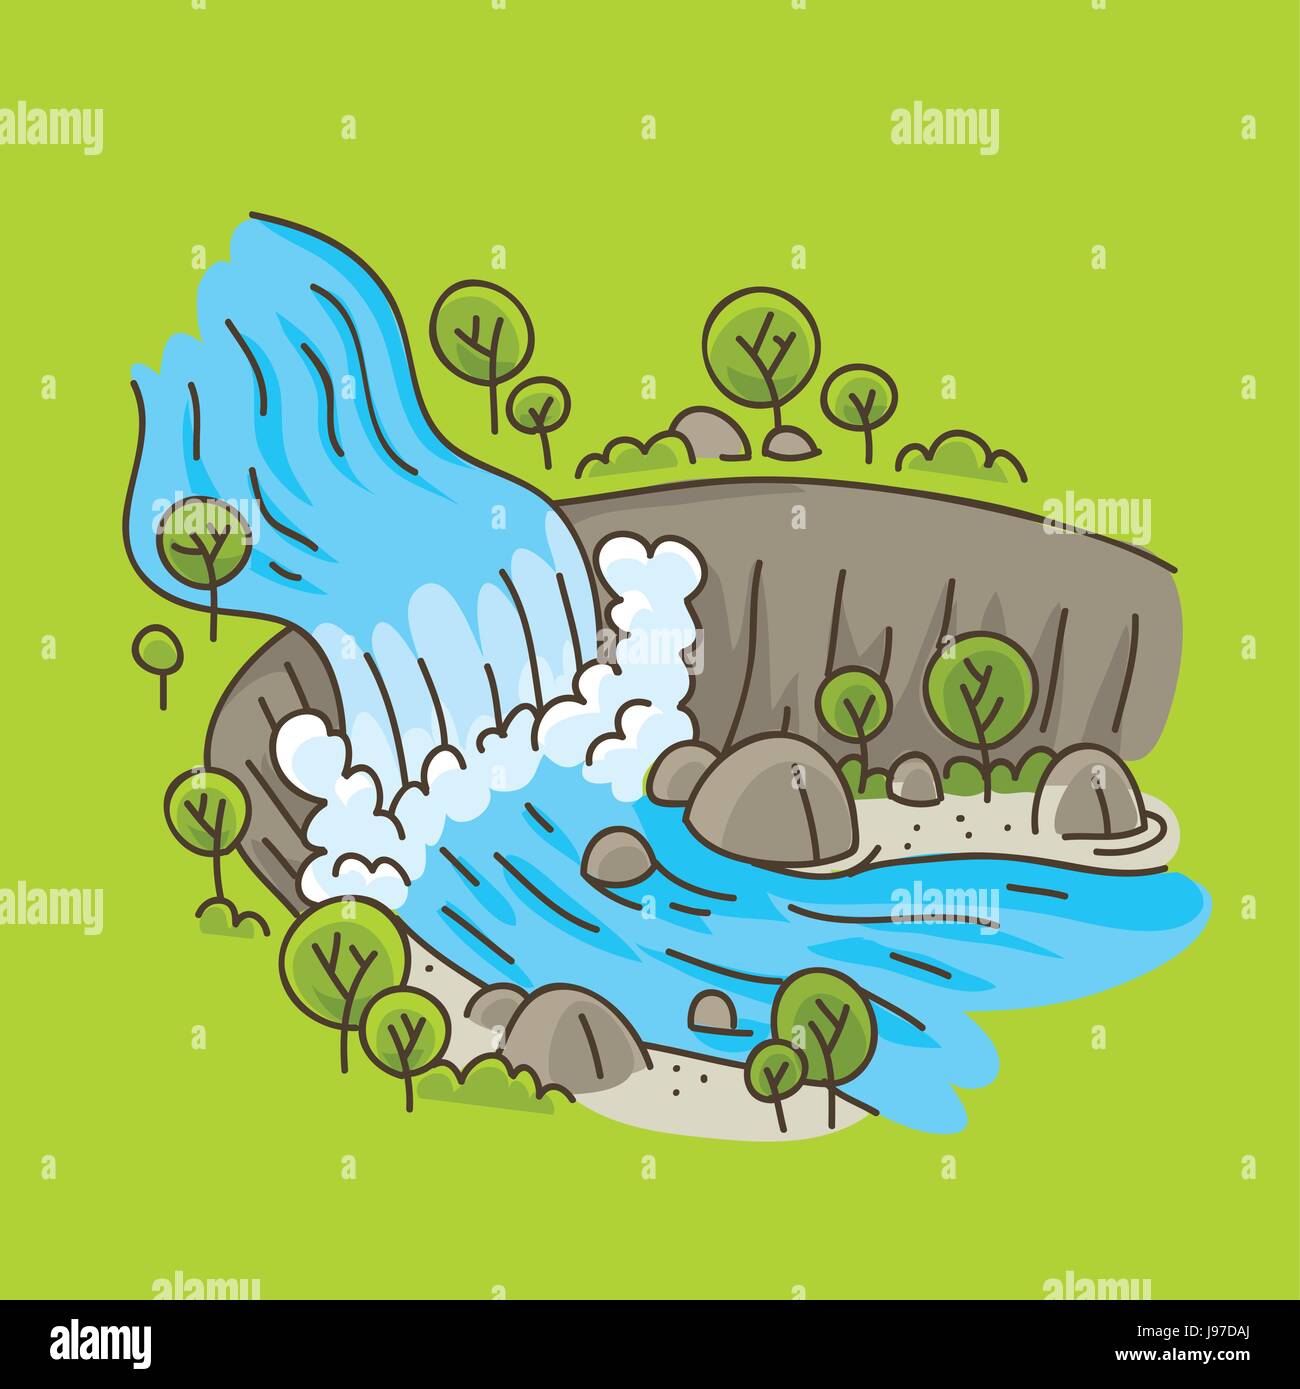 A cartoon waterfall in a bright, natural landscape. Stock Vector